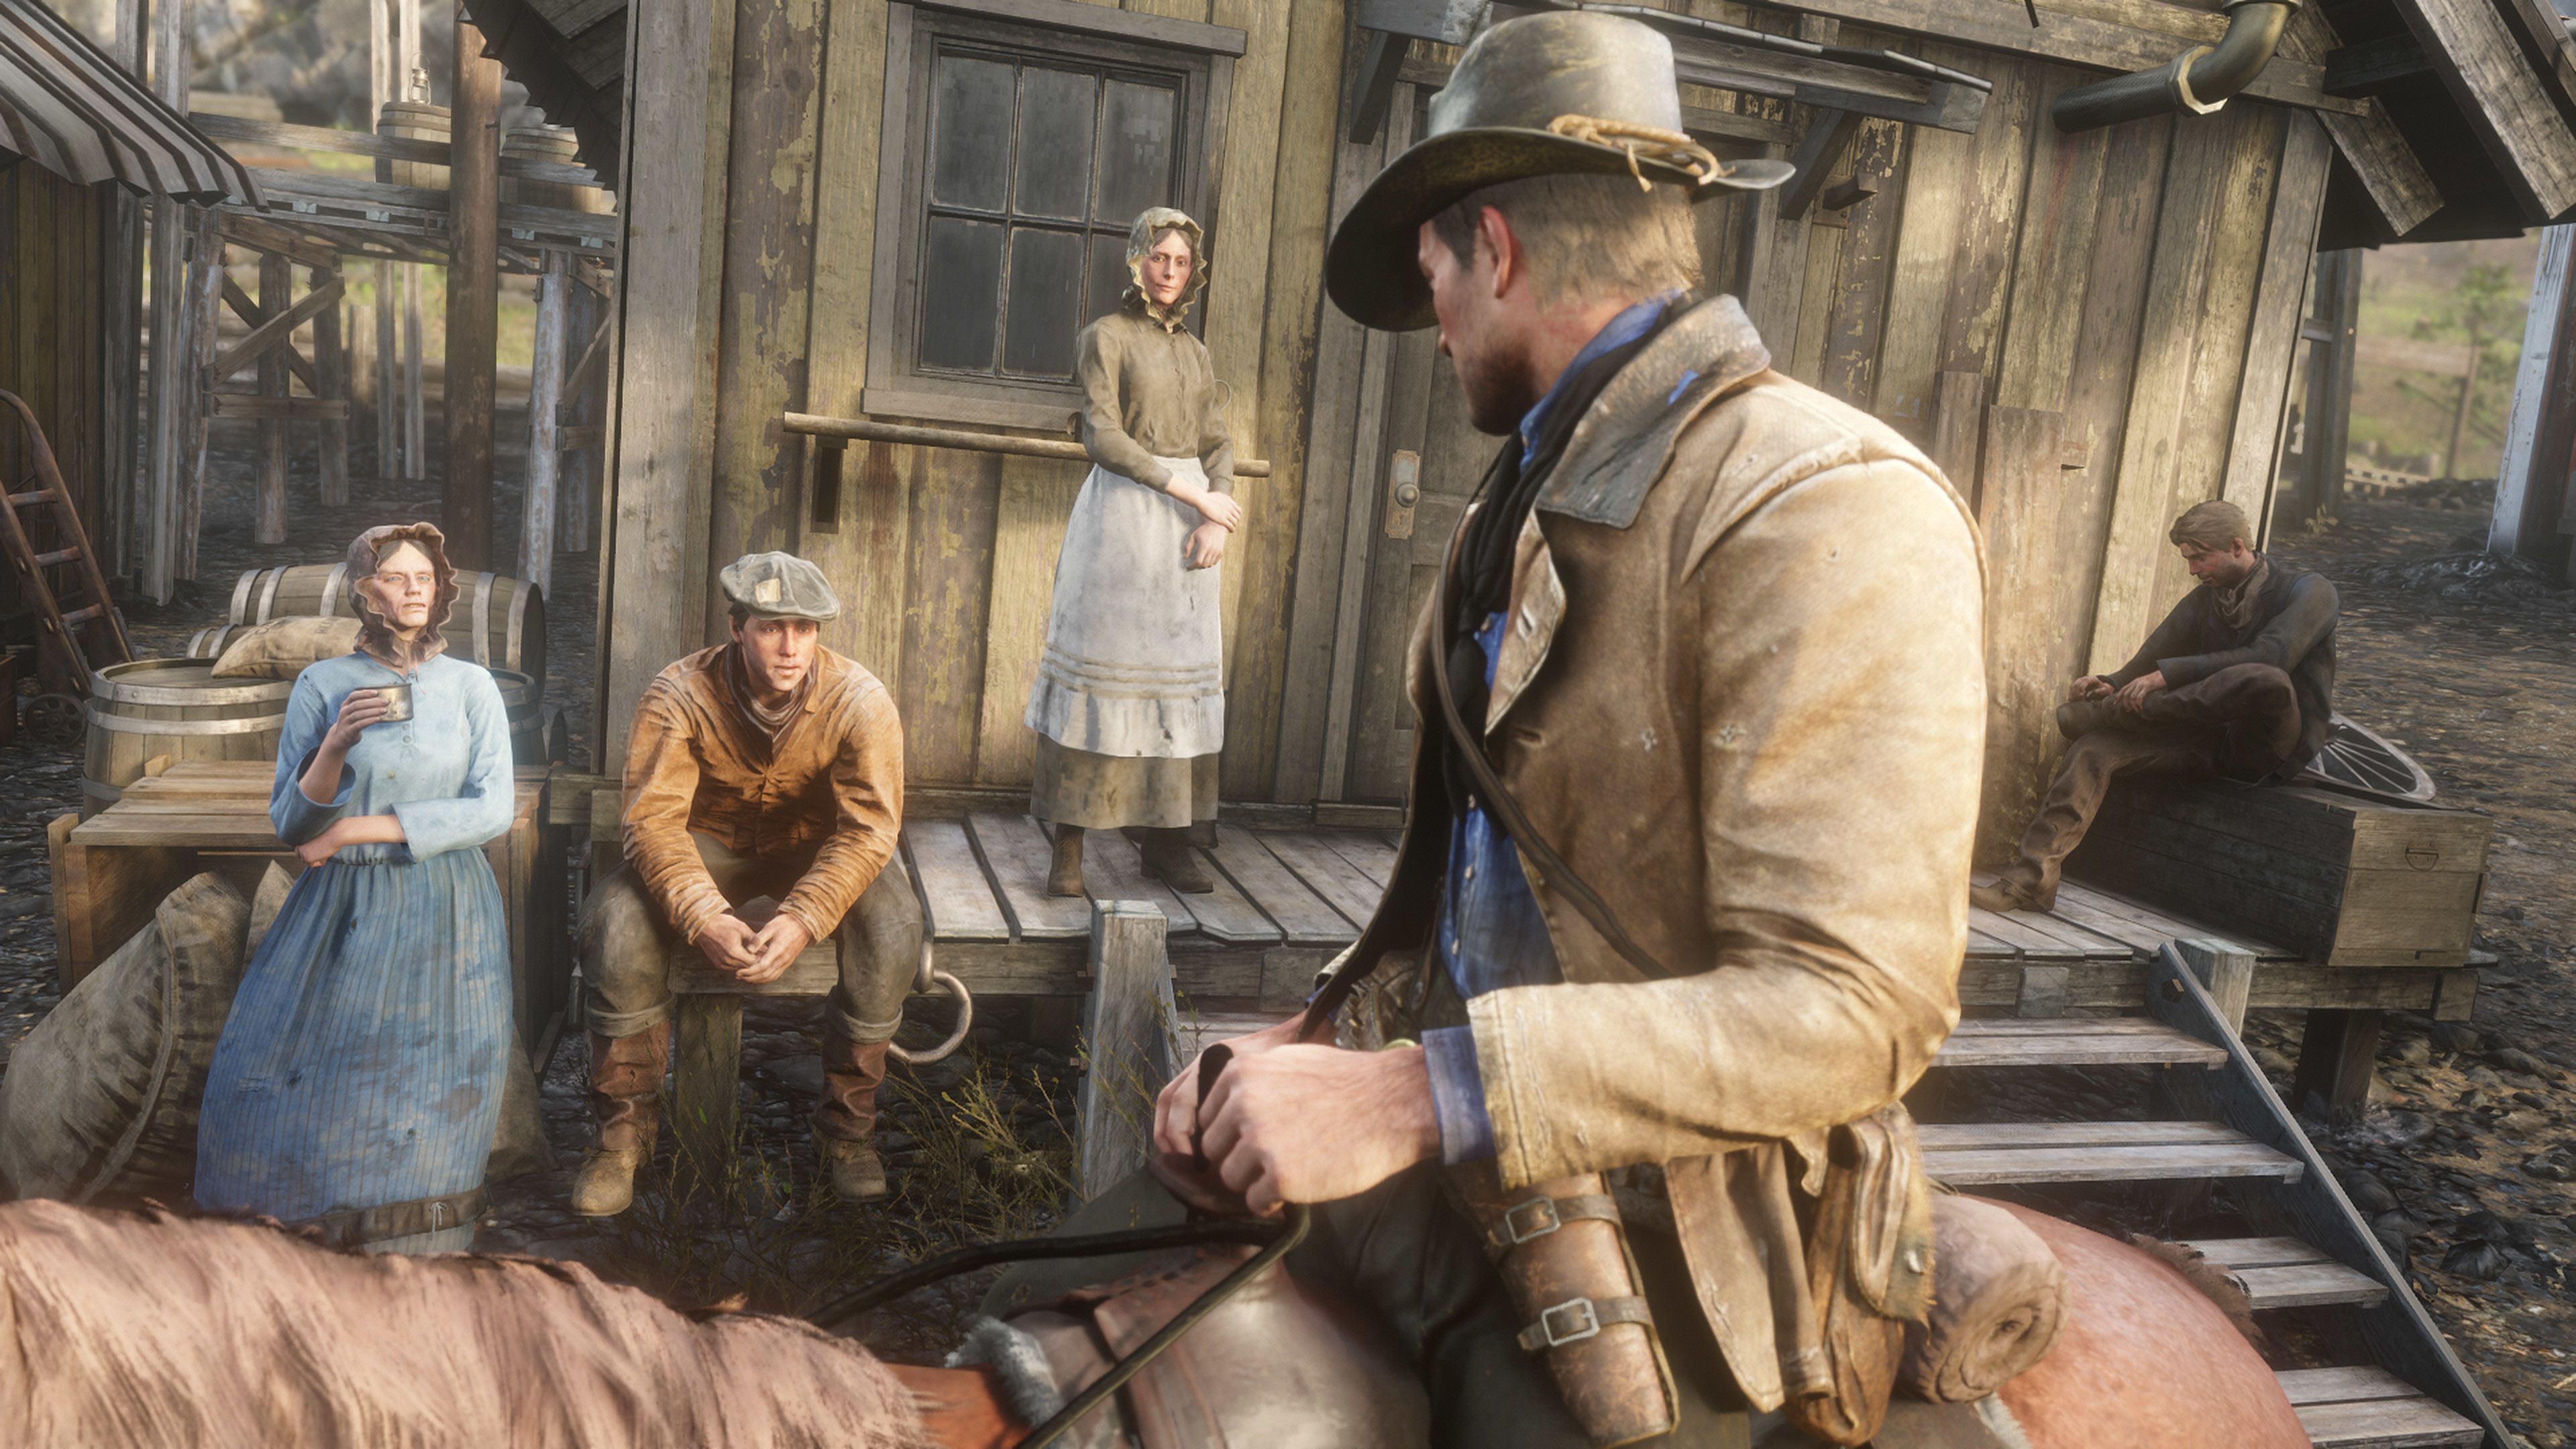 Arthur Morgan is looking at some people sitting on a porch while on top of a horse in Annesburg in Red Dead Redemption 2